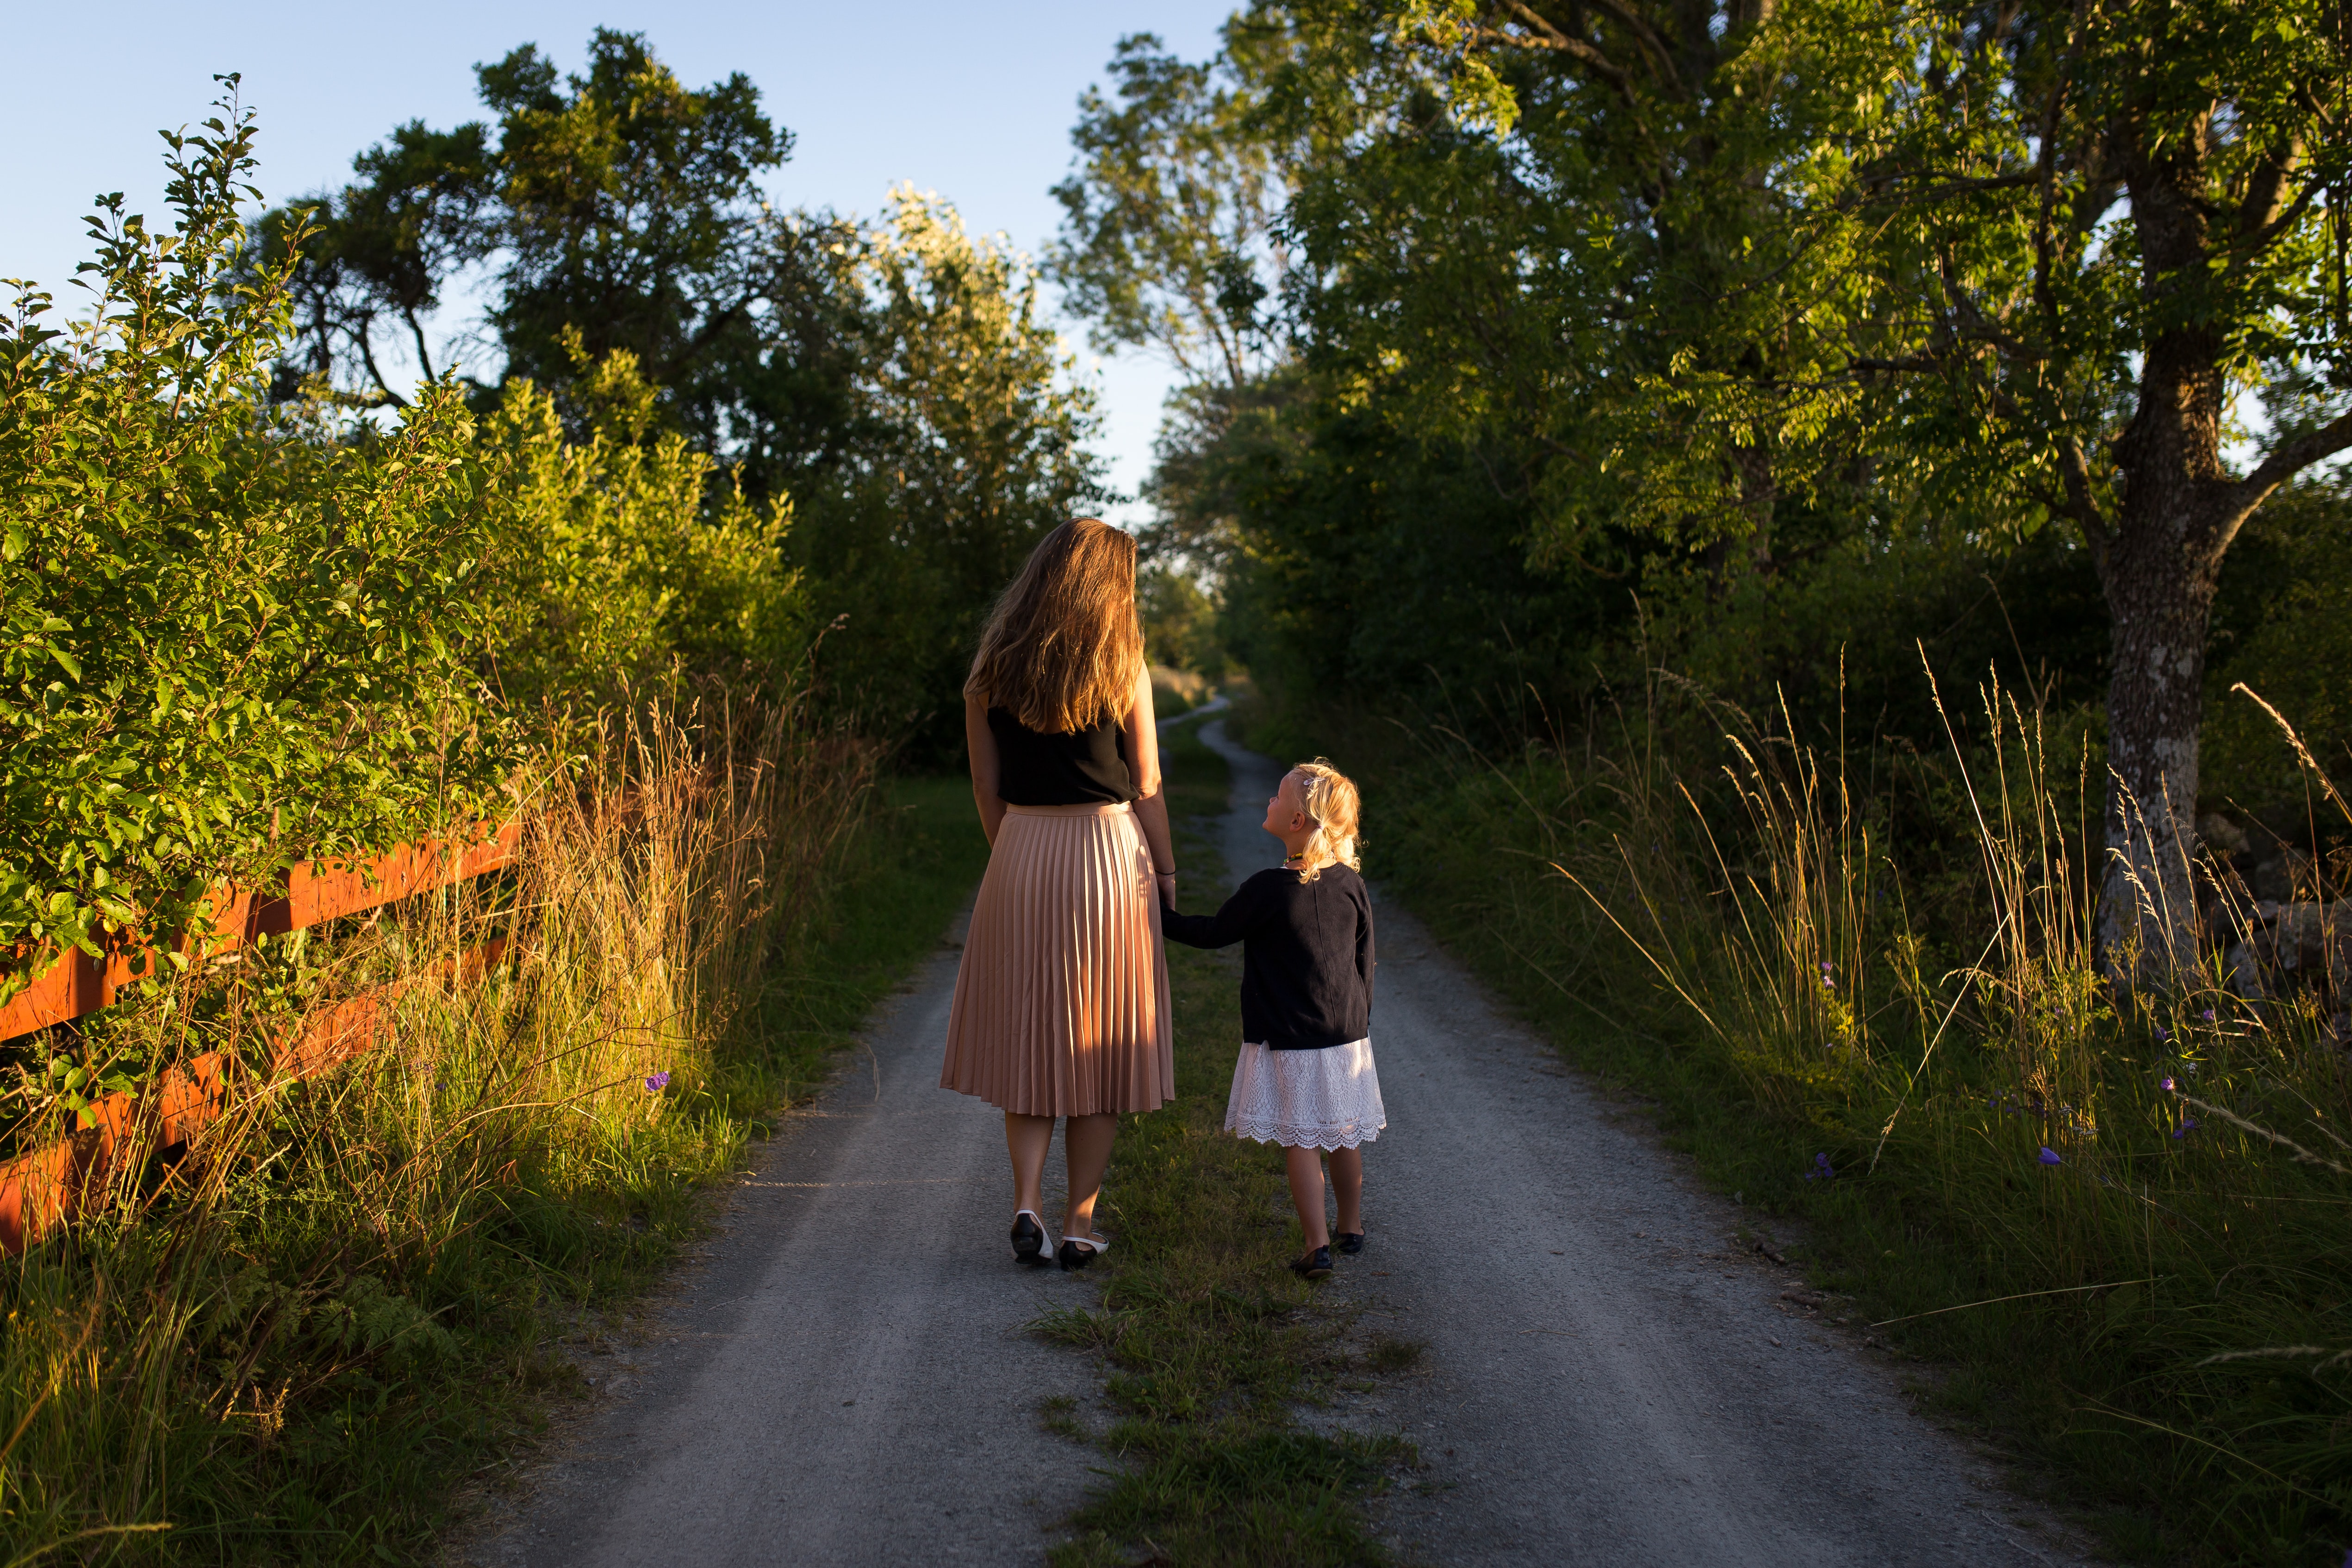 Woman and girl walking on road. 